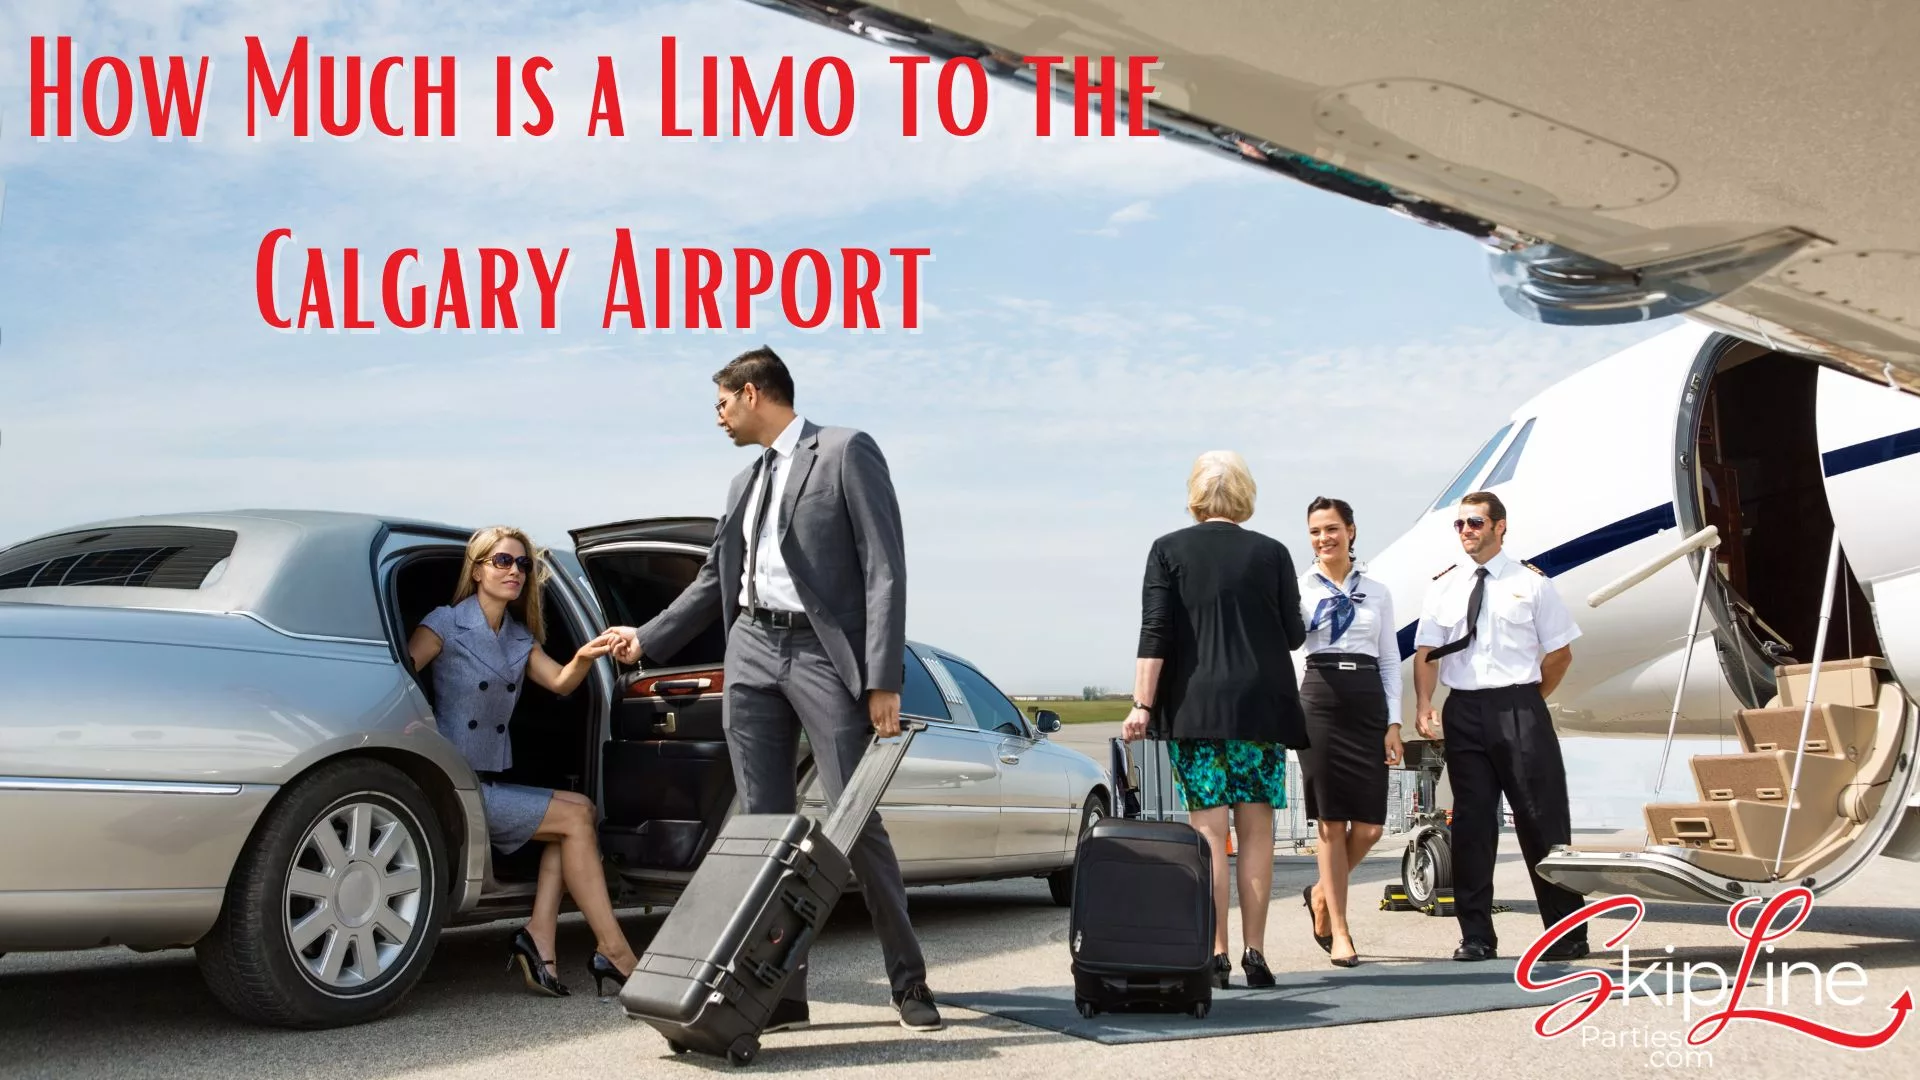 How Much is a Limo to the Calgary Airport with Skipline Parties